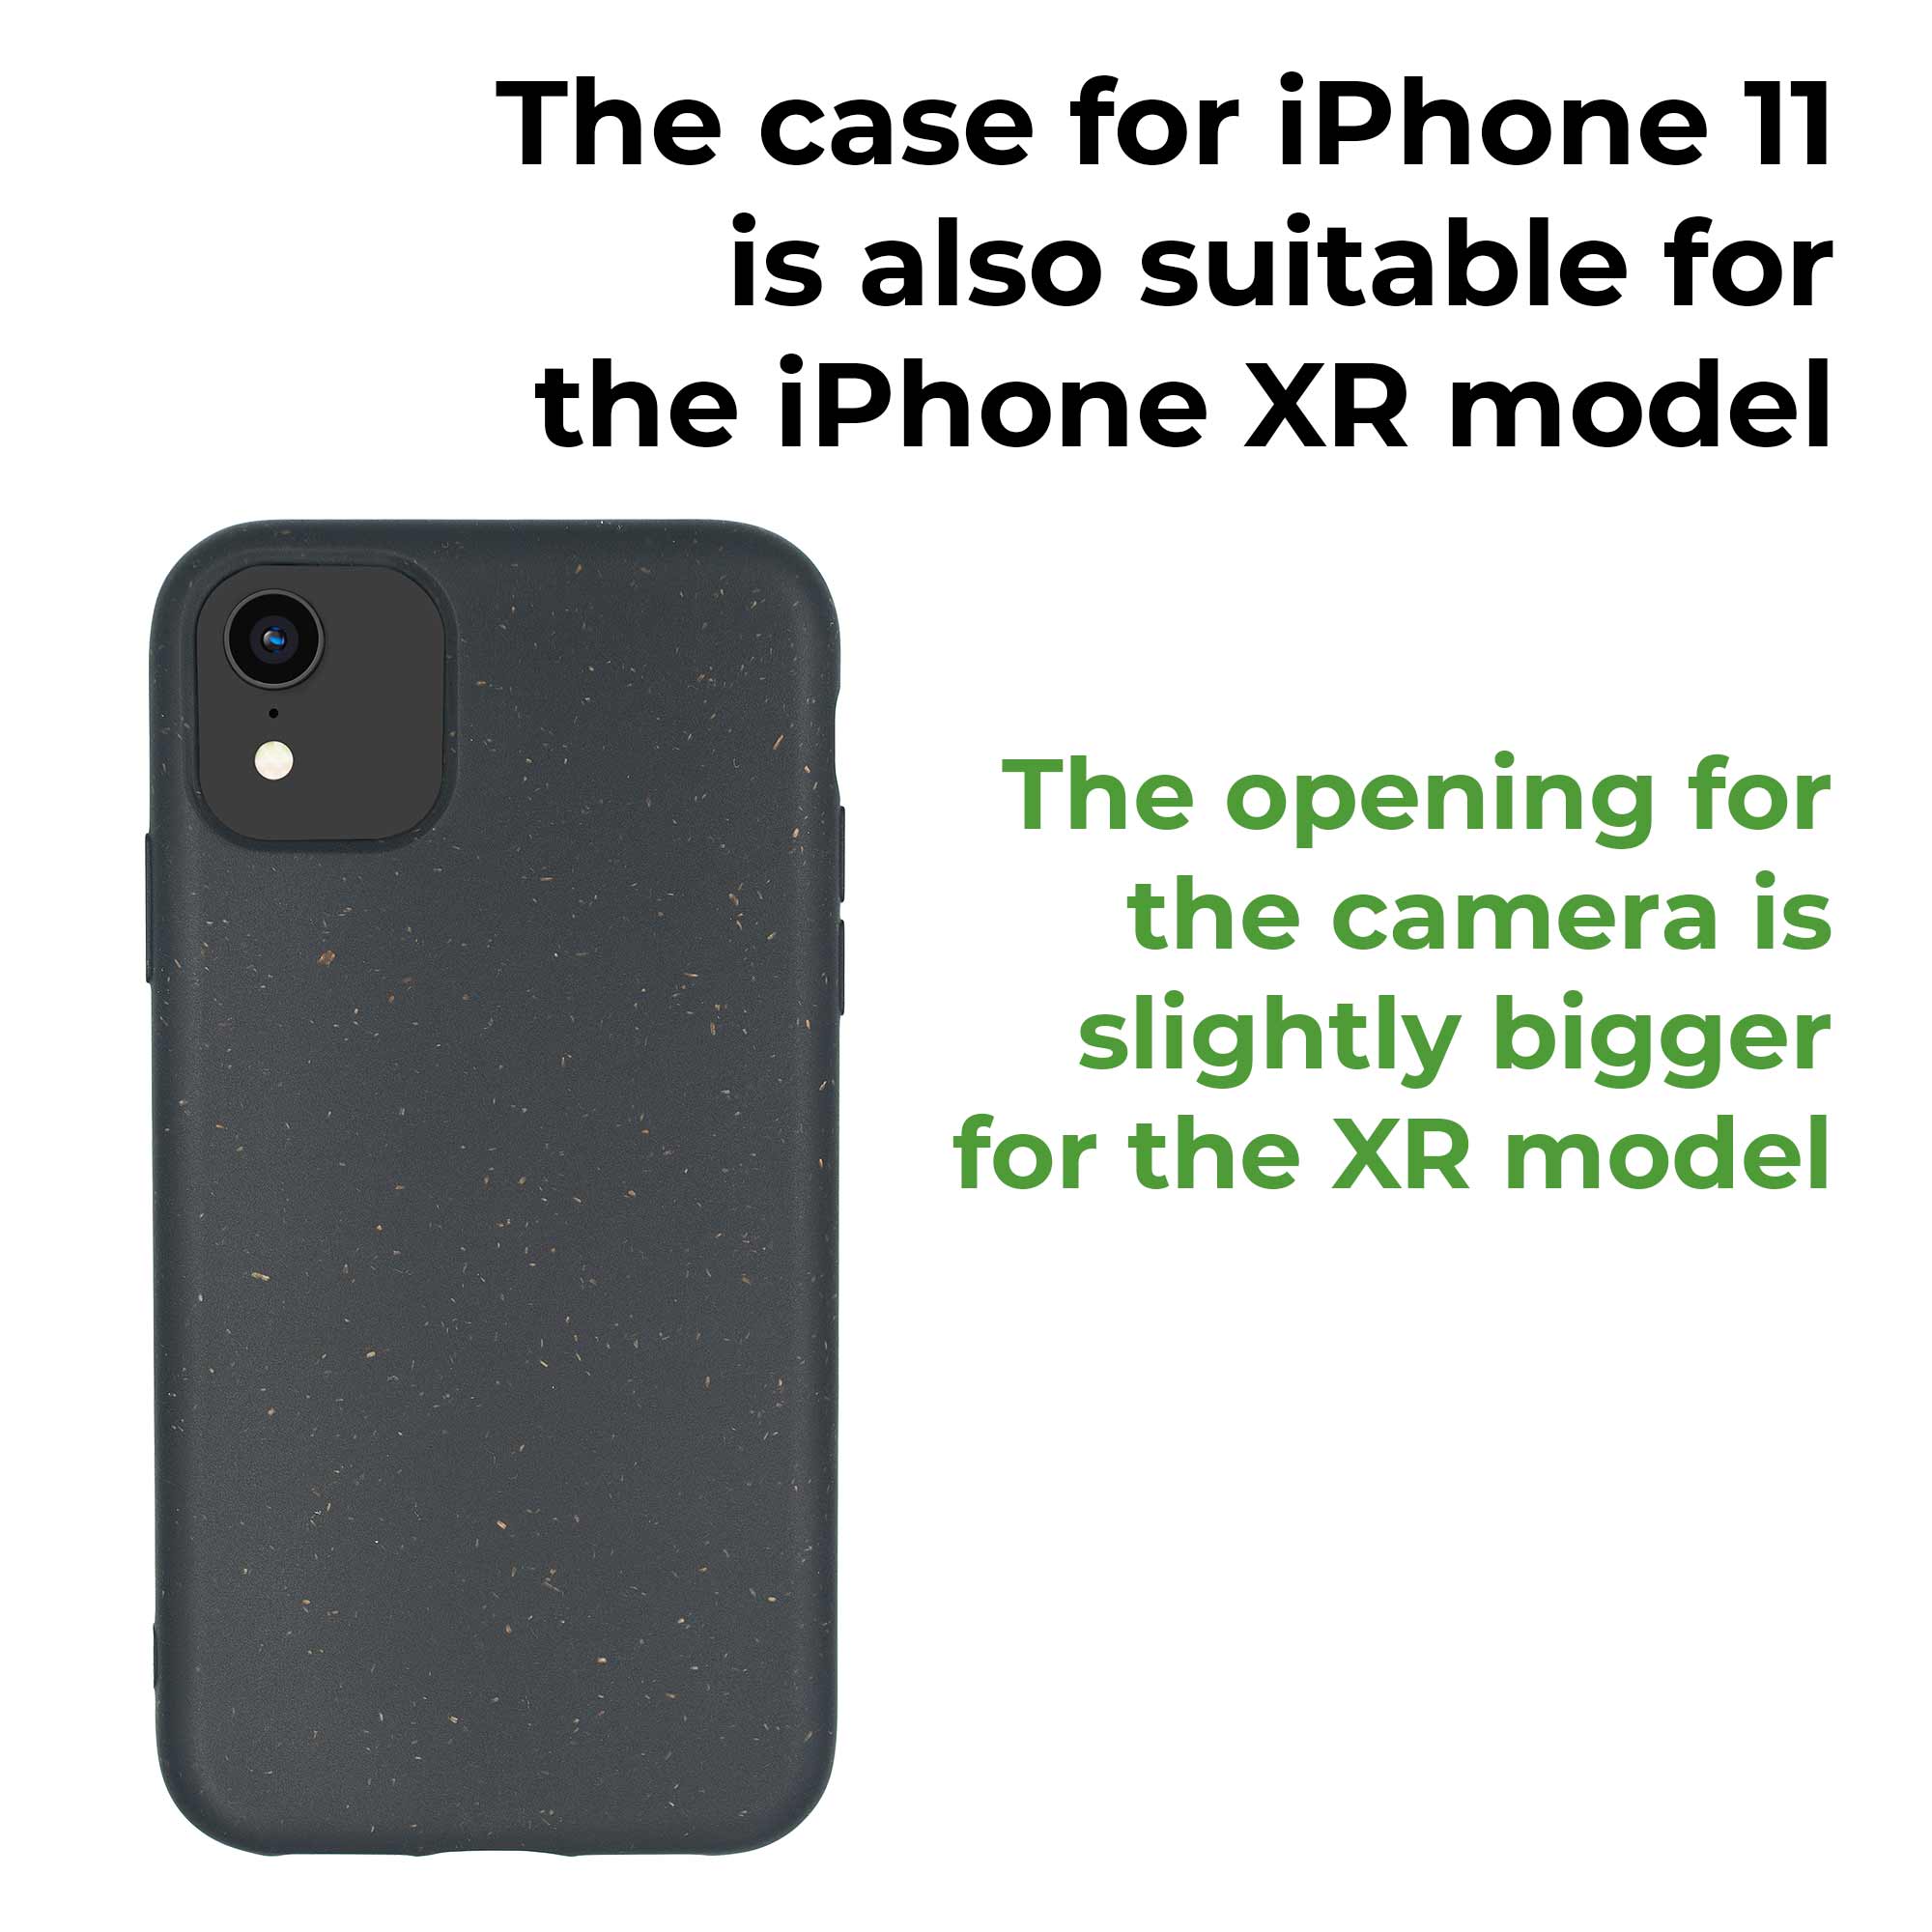 iPhone 11 Biodegradable Case is suitable for iPhone XR